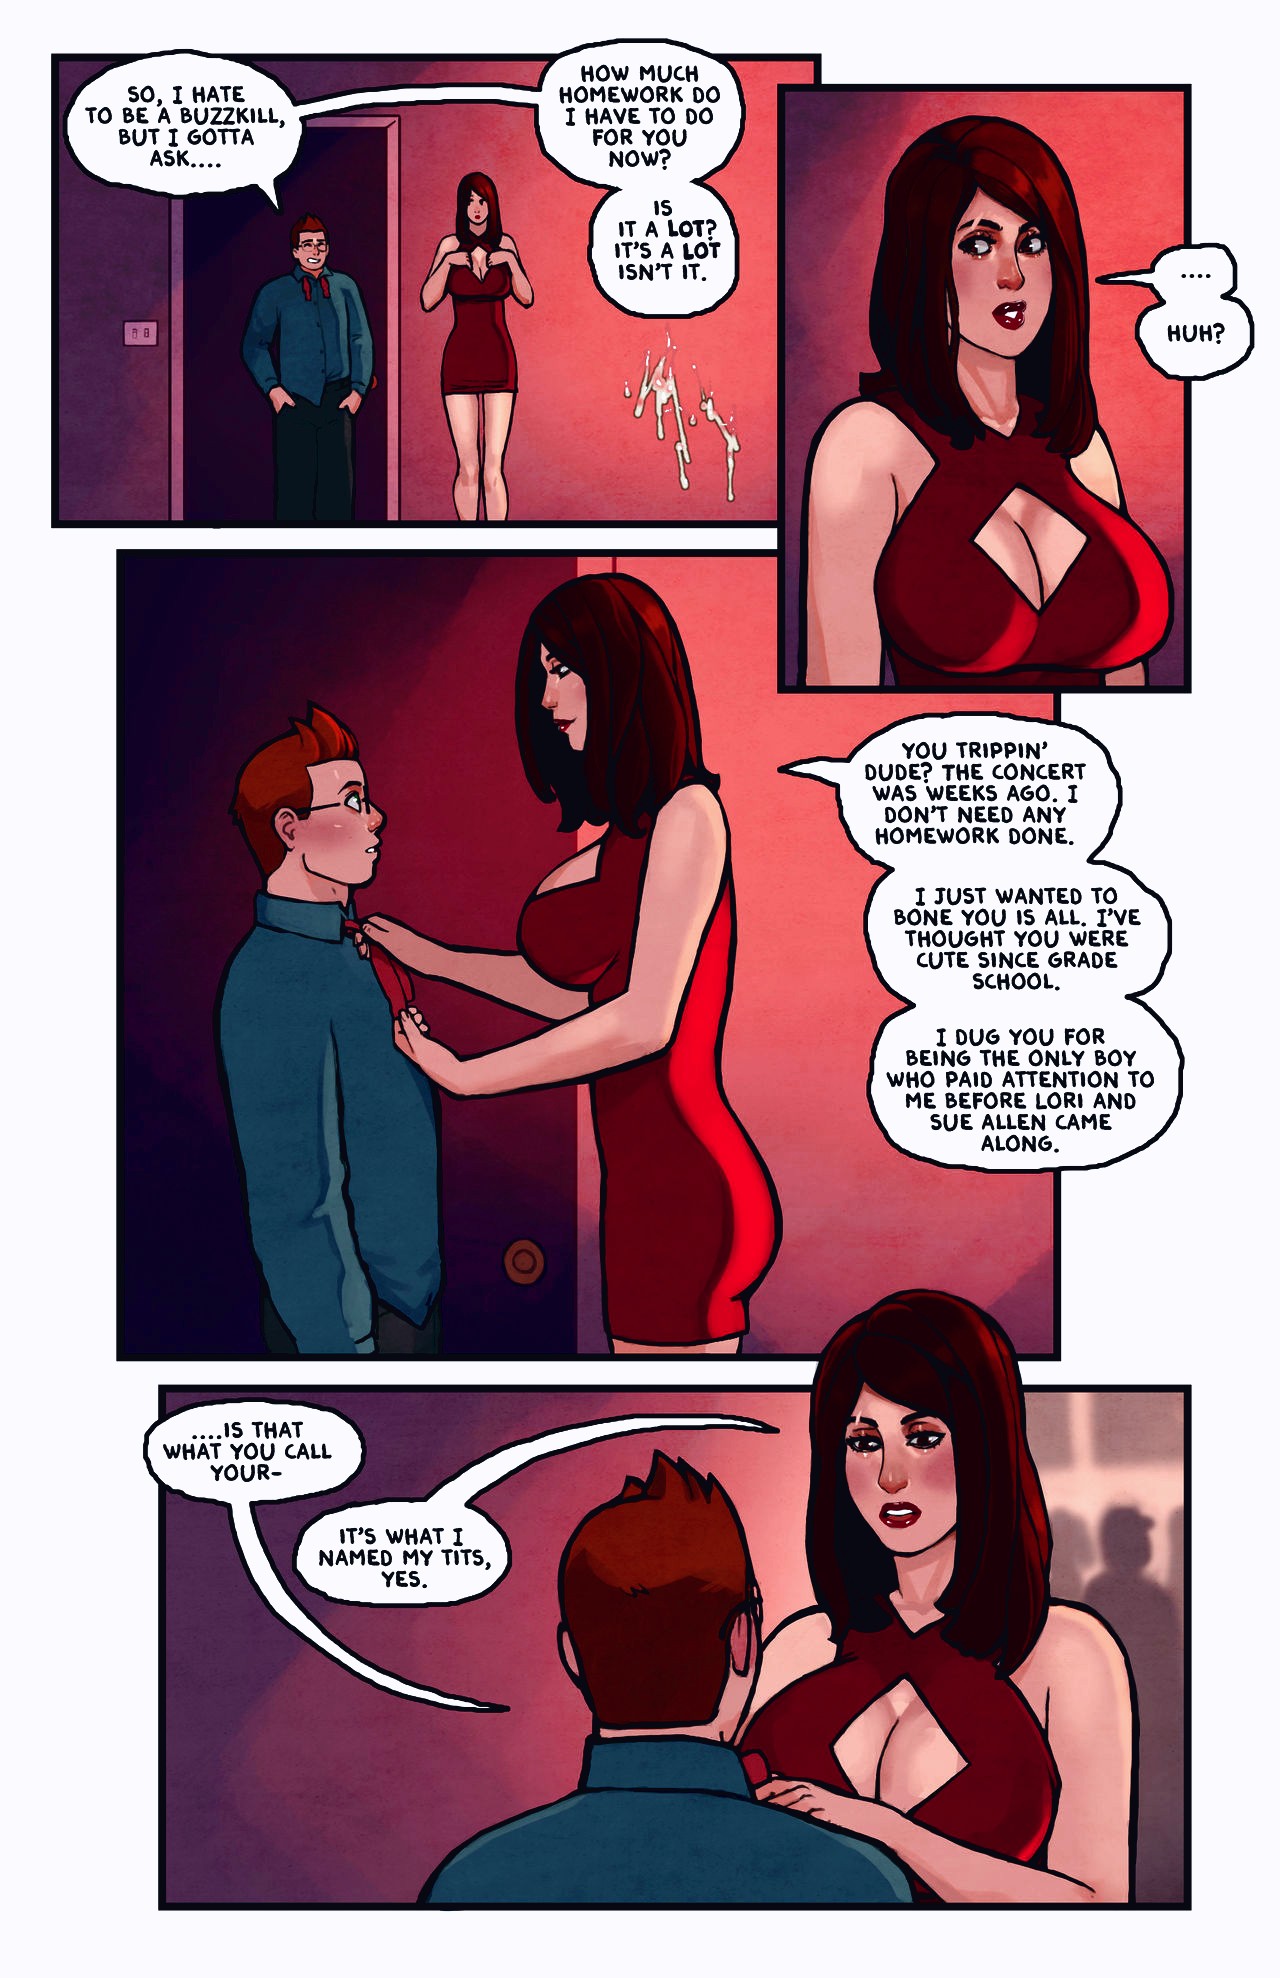 This Romantic World page 082